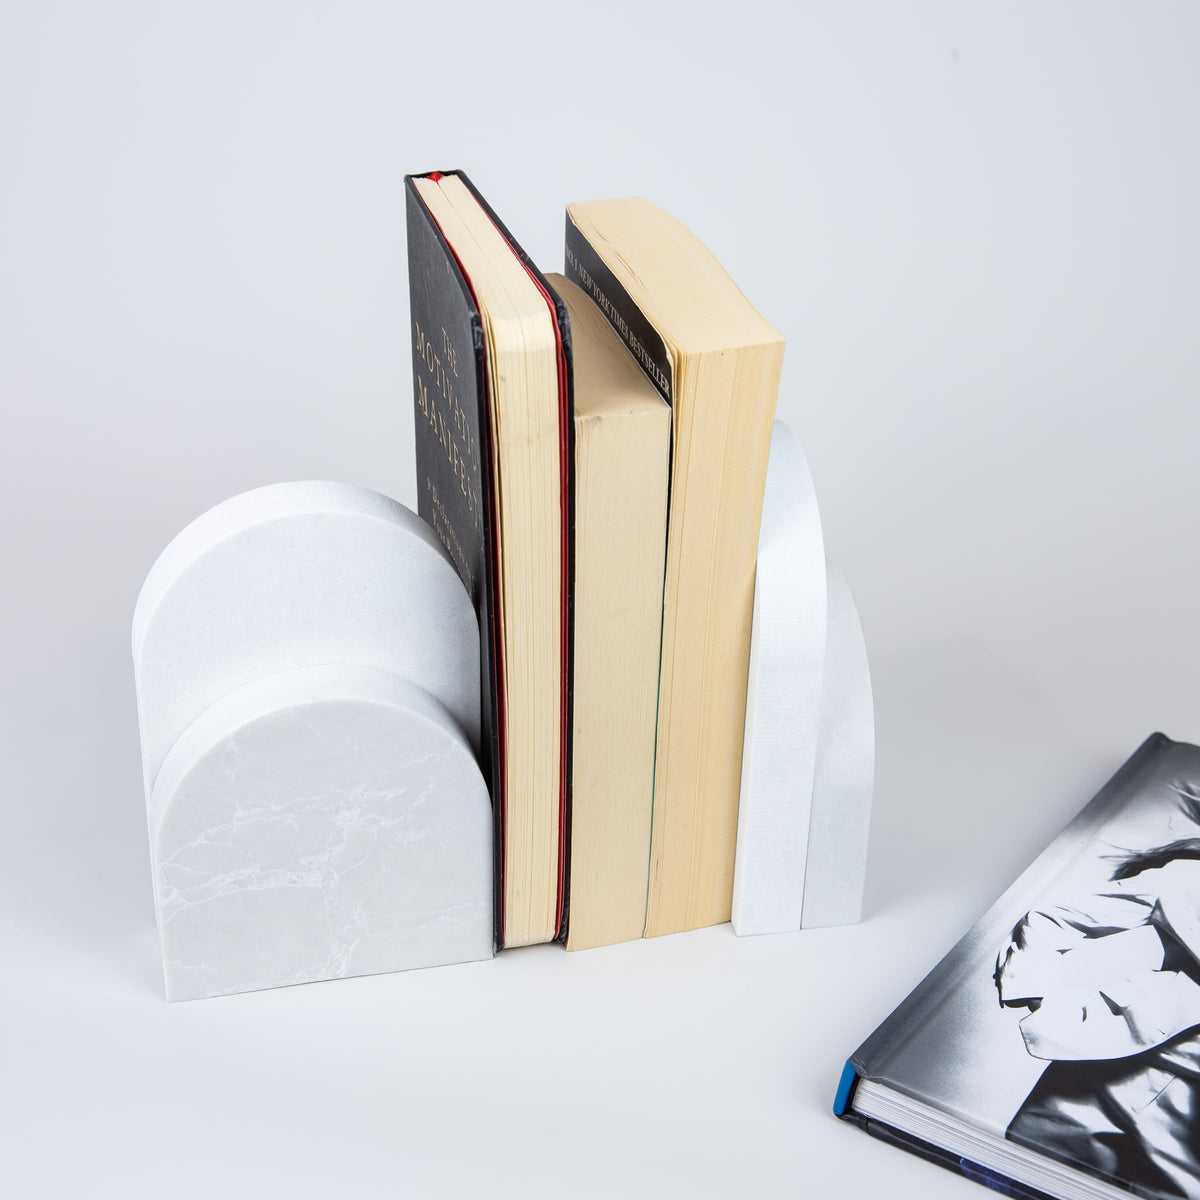 Quartz Bookend Set is 4cm thick. Styled with books. Available in Alpine Mist partnered with Organic White by Caesarstone a cool grey background with delicate crisp white veins, meets a clean white surface with subtly blended undertones, reflecting a natural appearance that is effortlessly chic. The perfect addition to your home decor, similar to marble bookends.